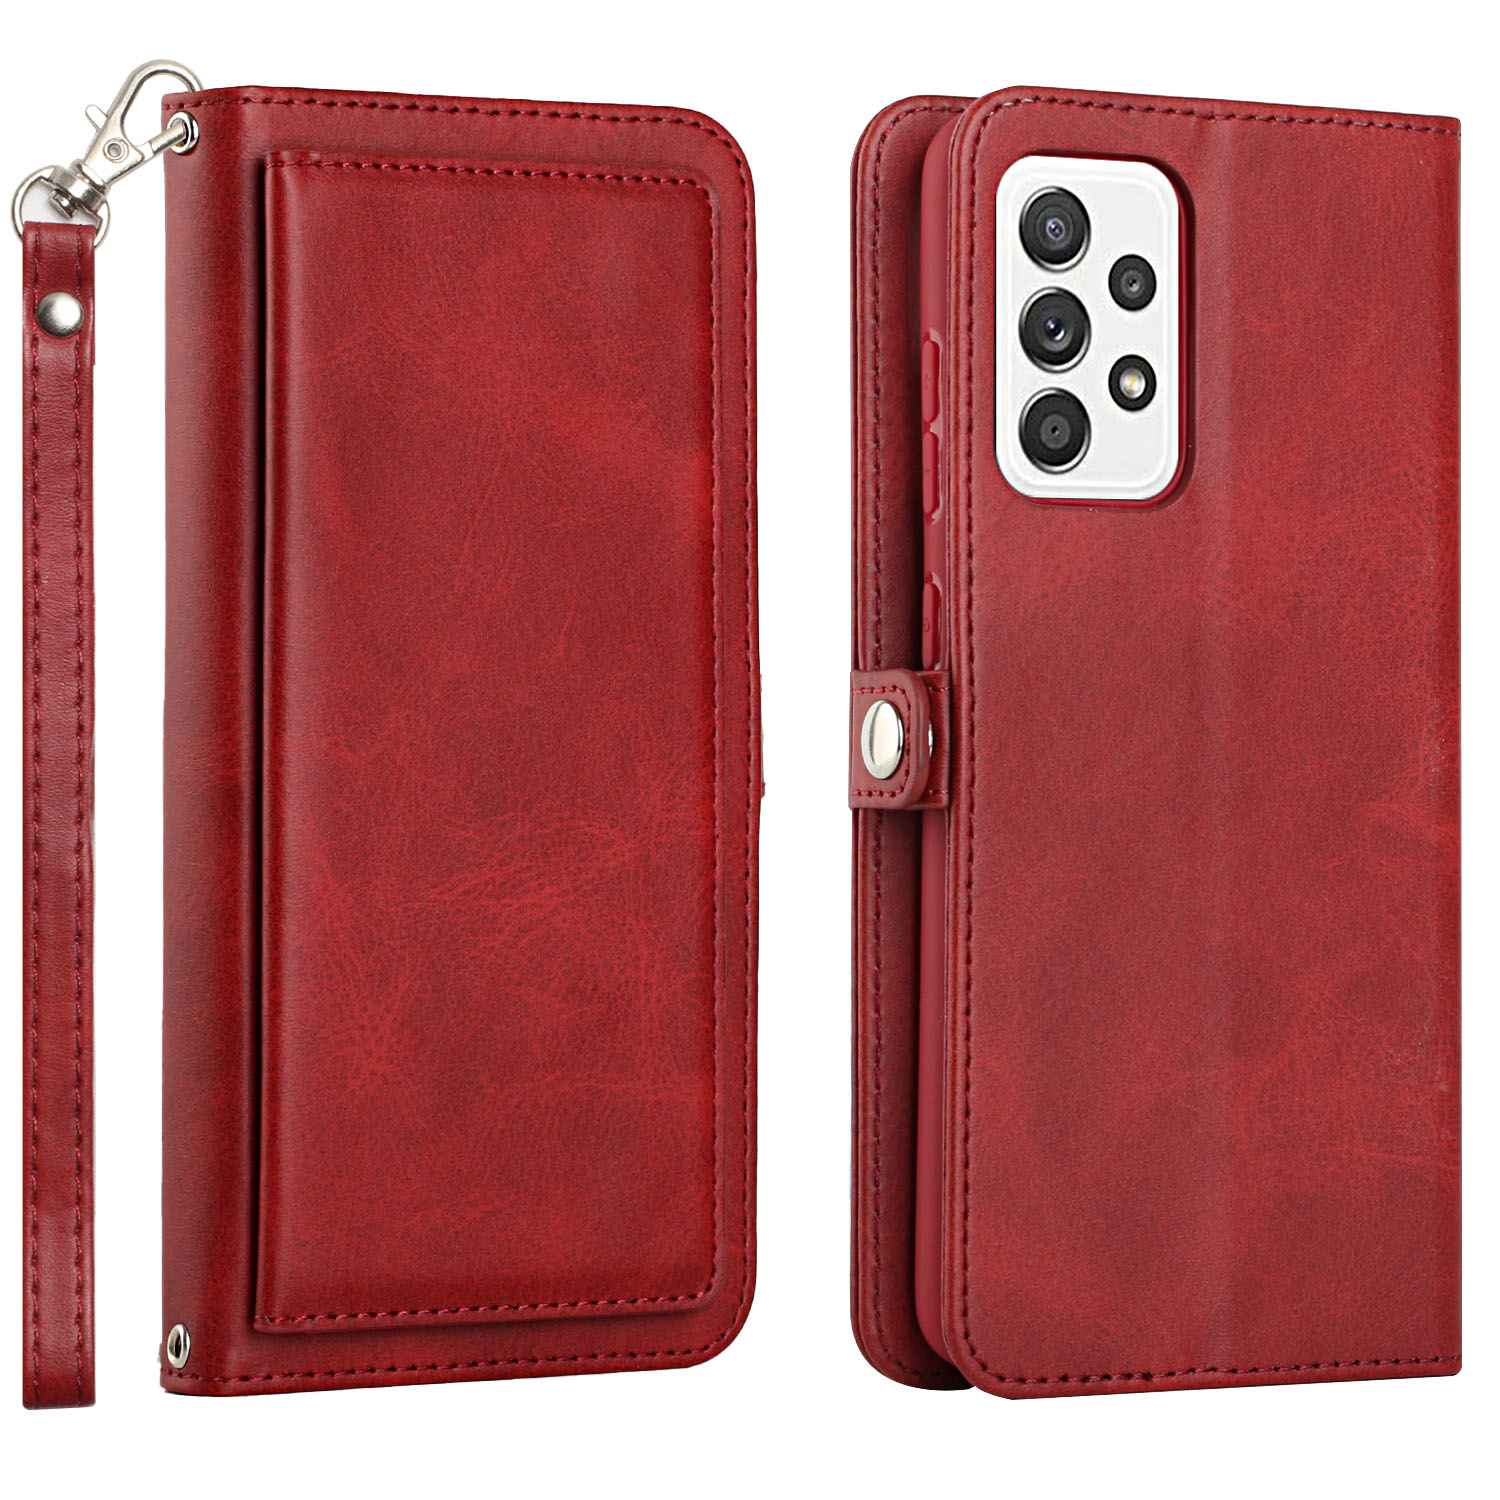 Premium PU Leather Folio WALLET Front Cover Case for Galaxy A52 5G (Red)